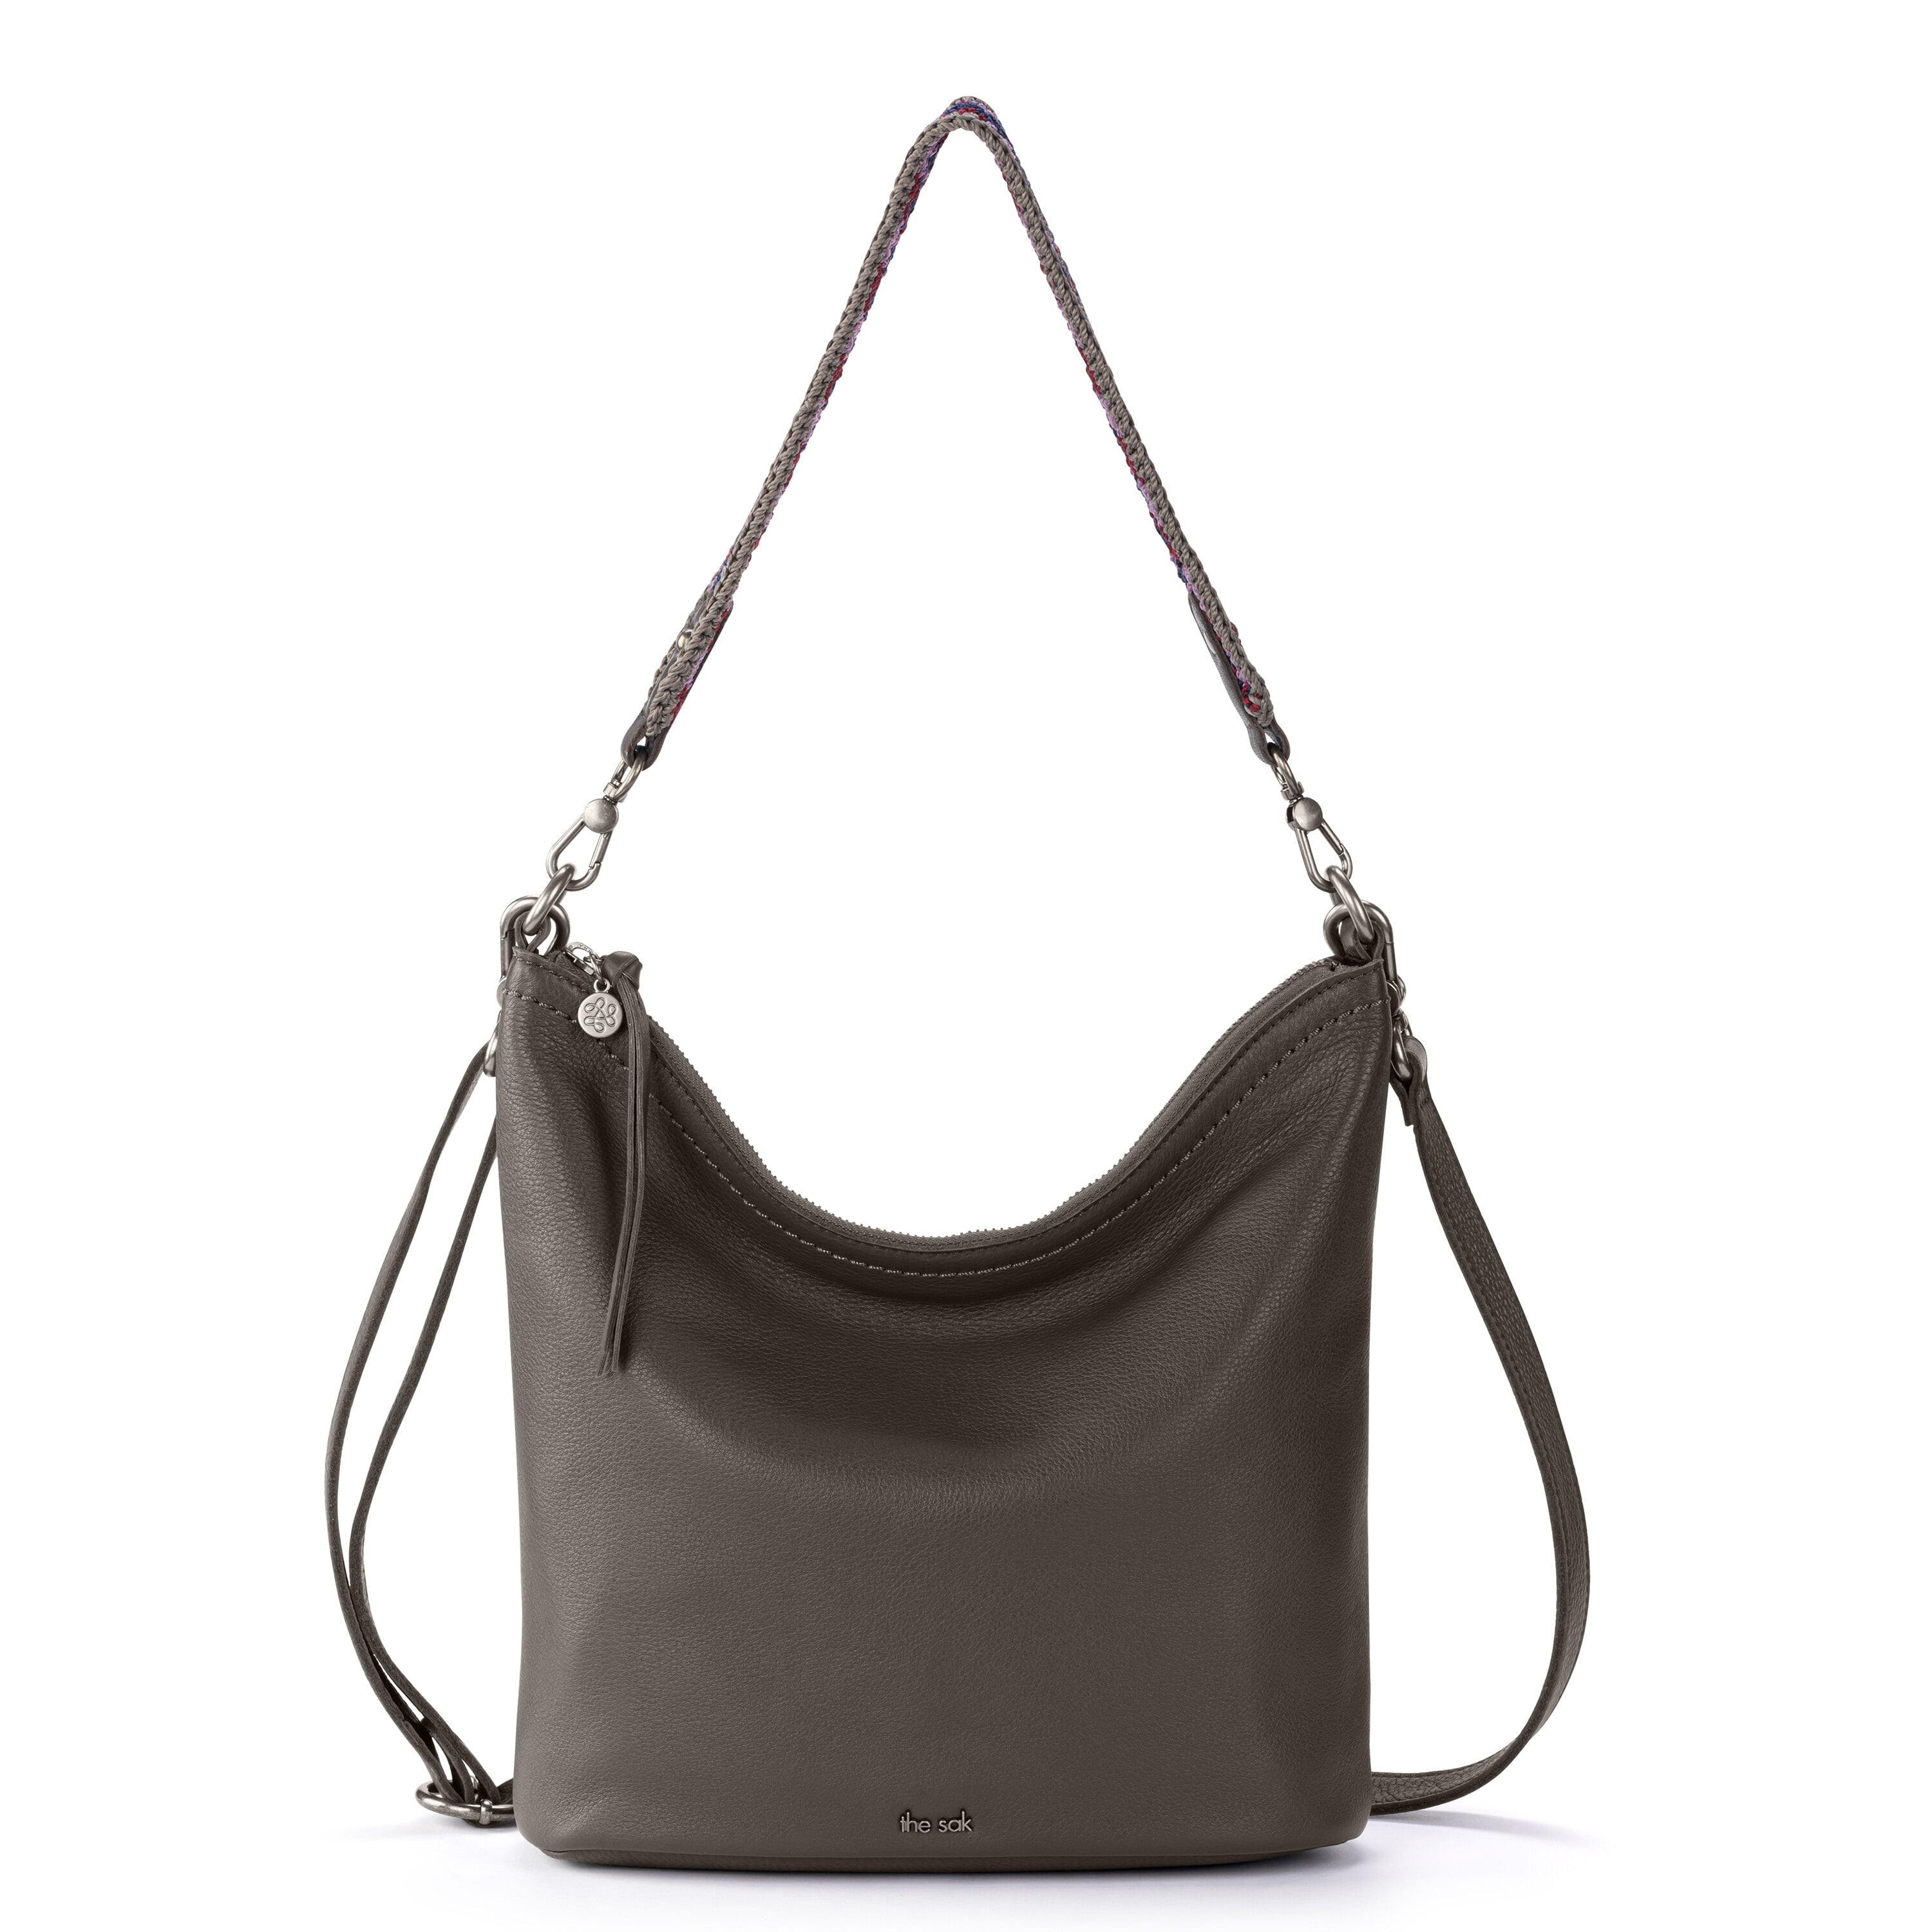 Catalina Leather Hobo Bag - Women's Leather Purse Distressed Grey / with Xbody Strap